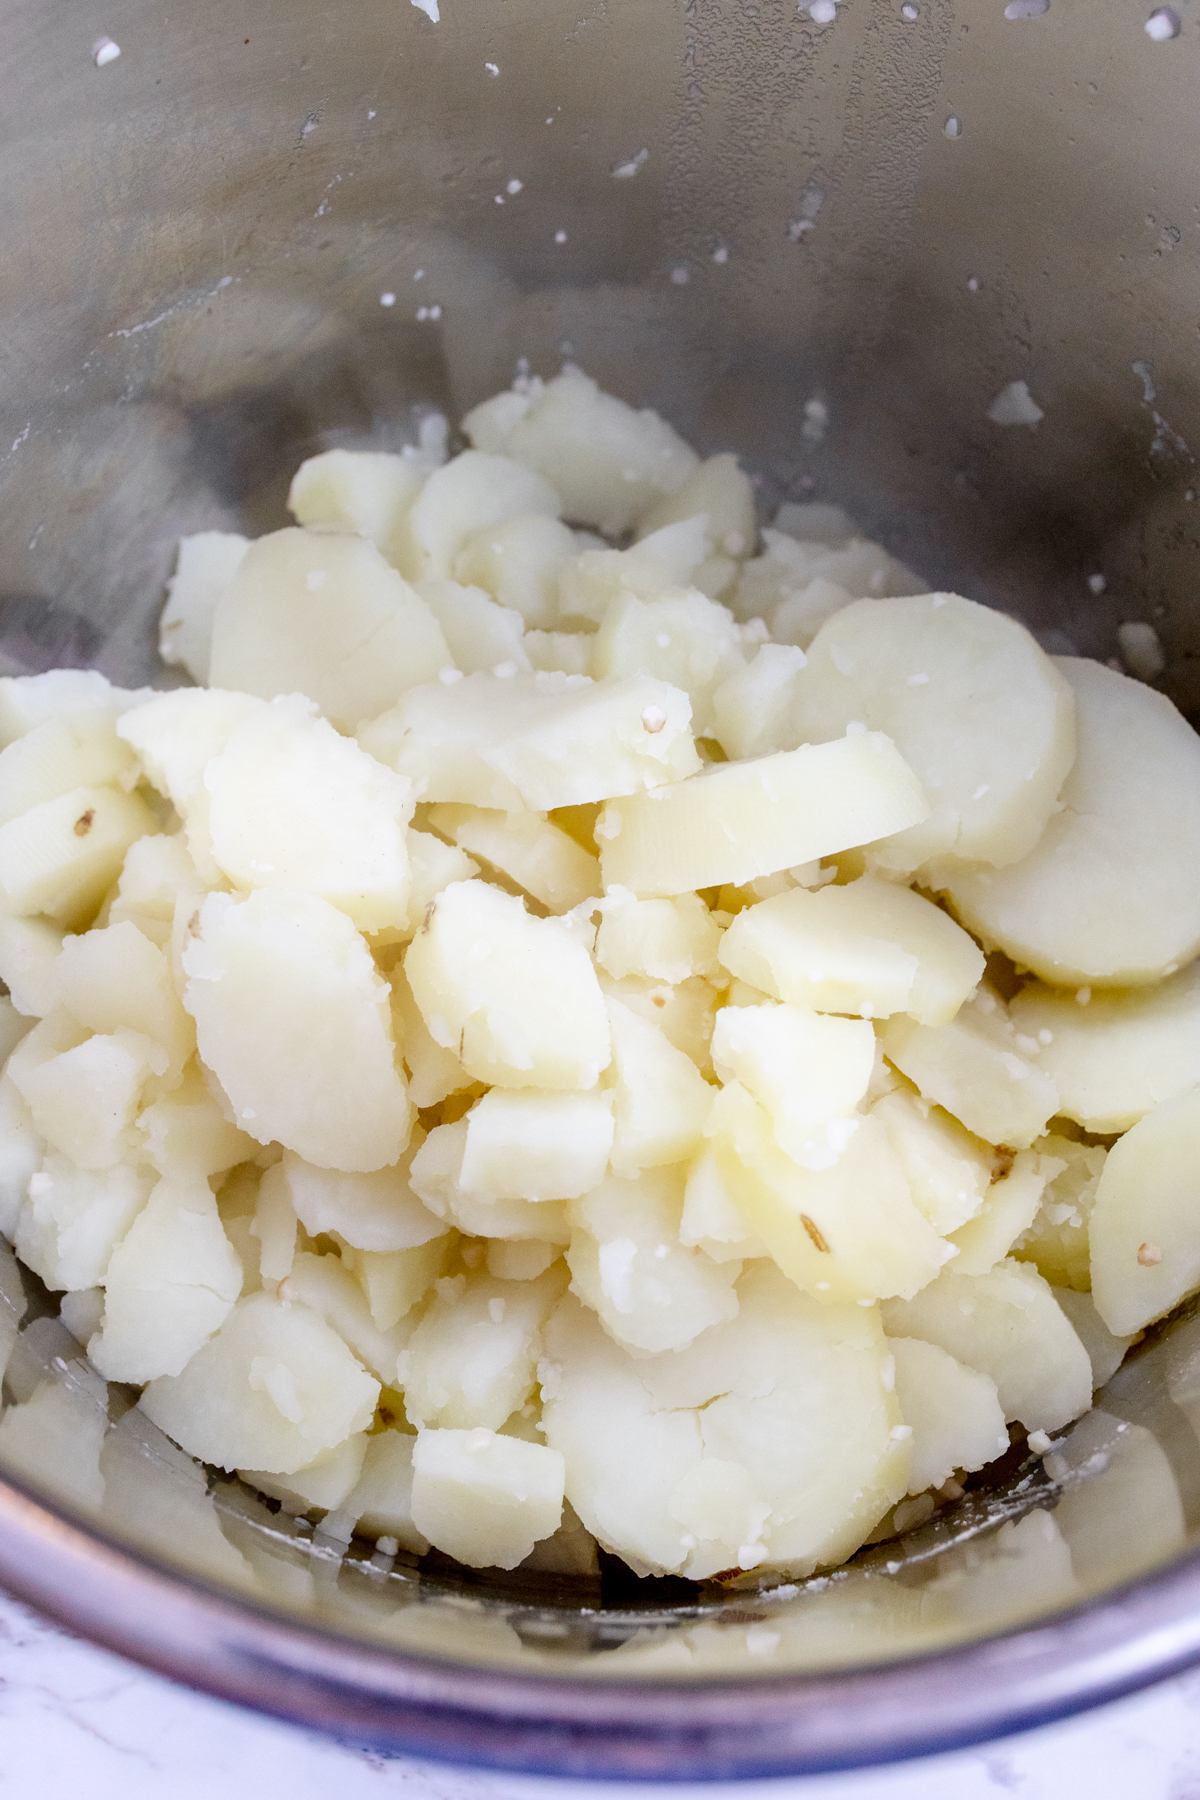 Close-up view of n Instant Pot liner with drained potatoes in it.